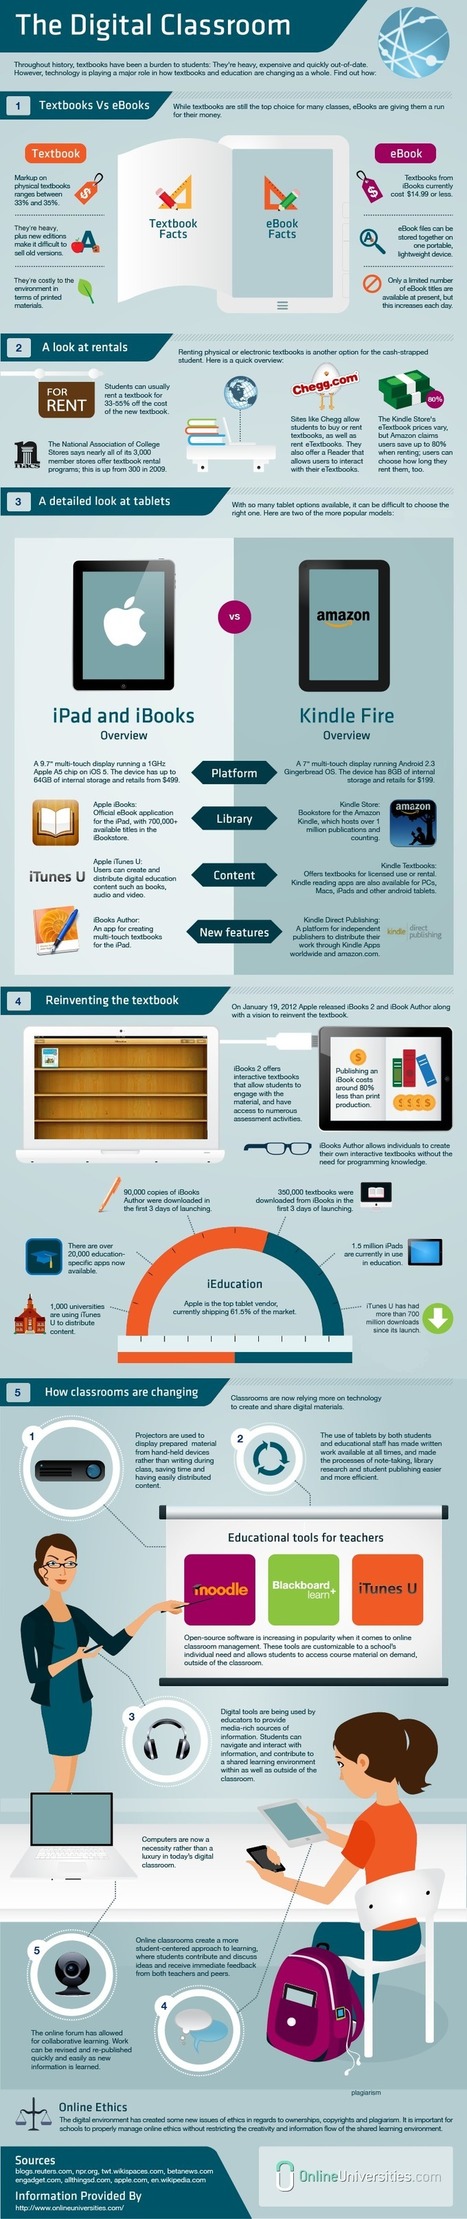 The 5 Important Elements of The 21st Century Classroom [Infographic] | 21st Century Learning and Teaching | Scoop.it